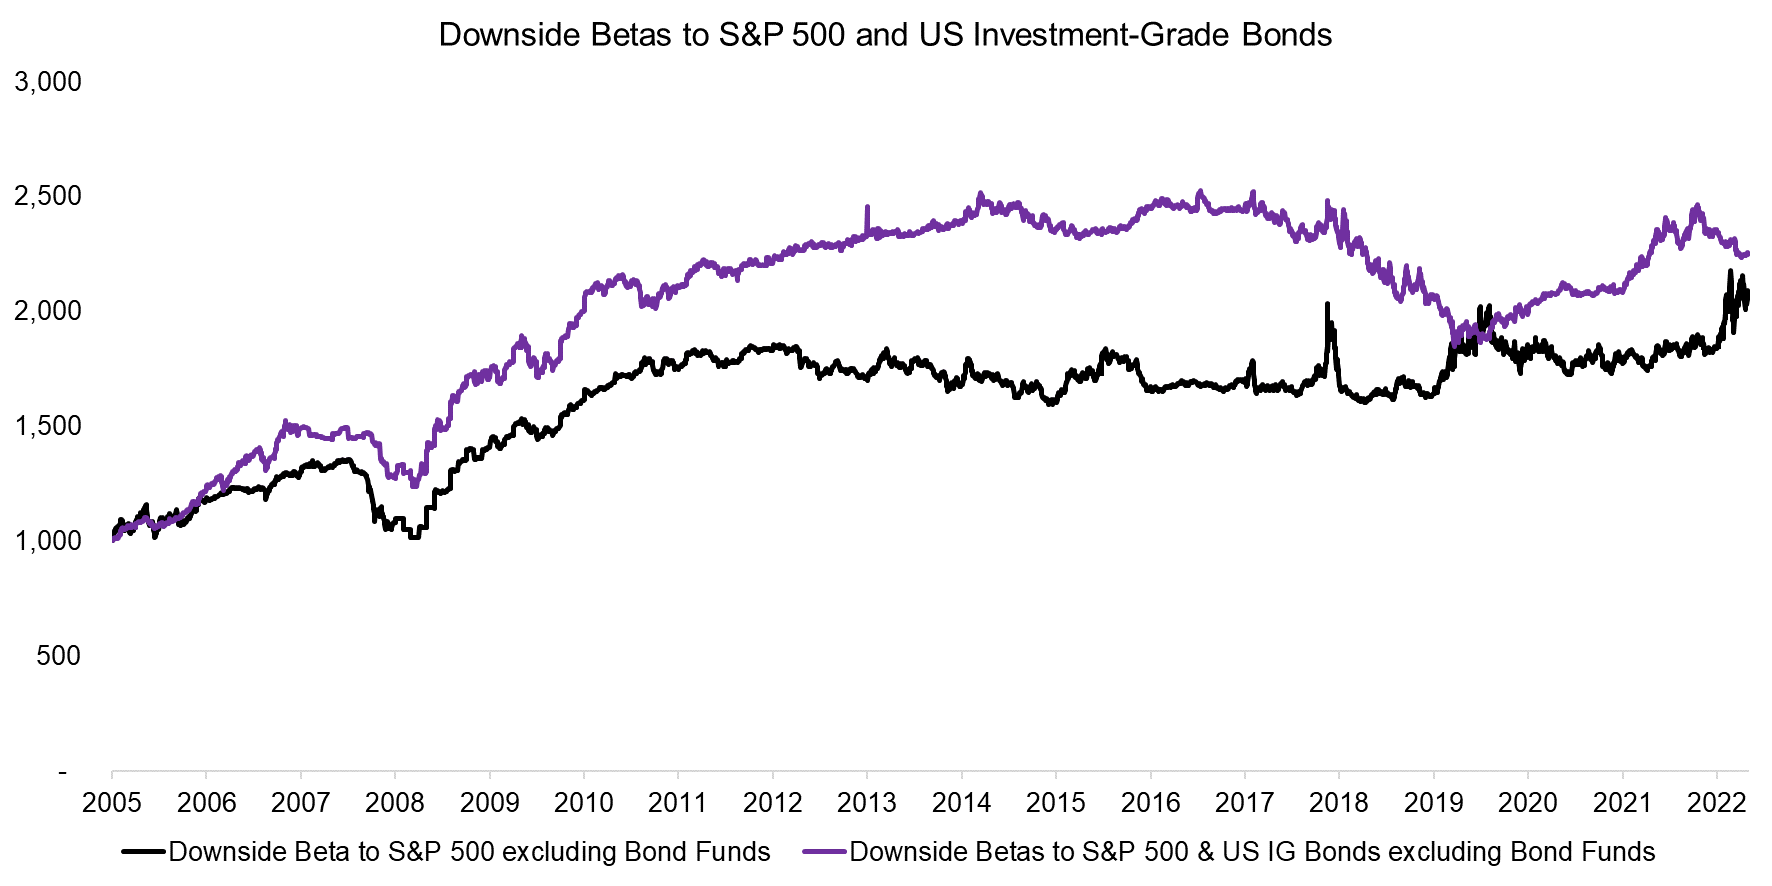 Downside Betas to S&P 500 and US Investment-Grade Bonds